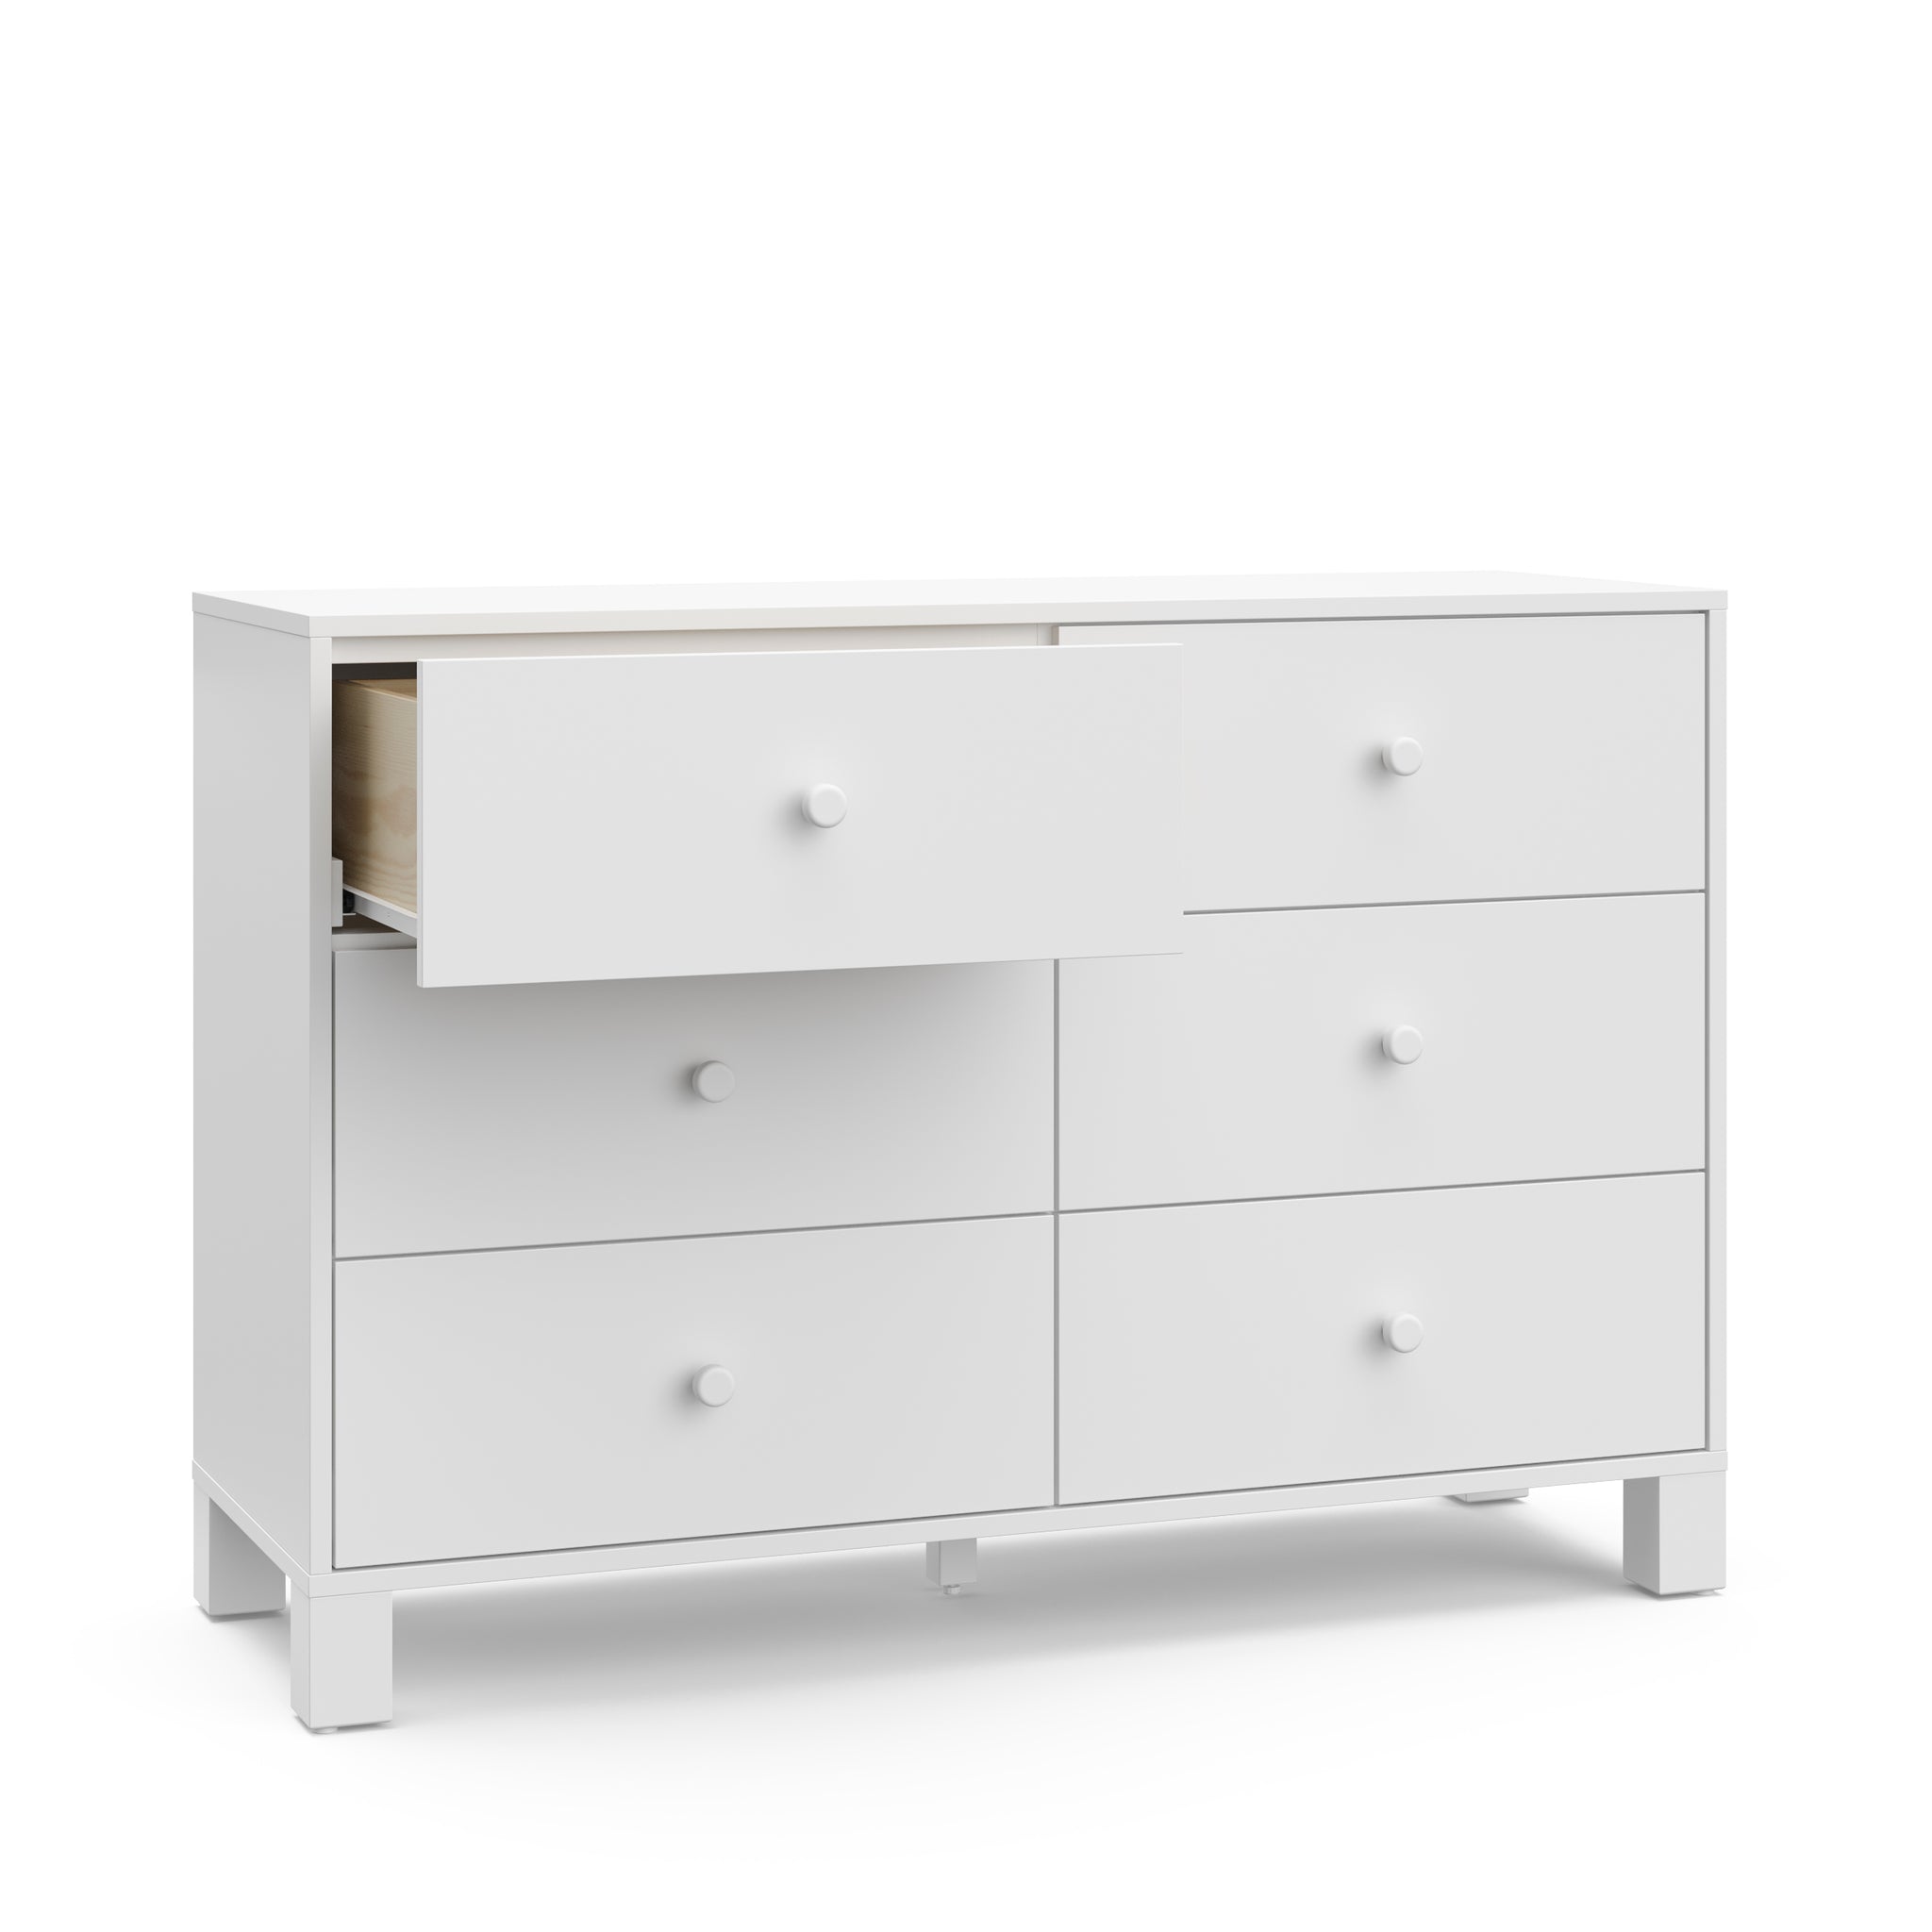 Angled view of white dresser with one open drawer